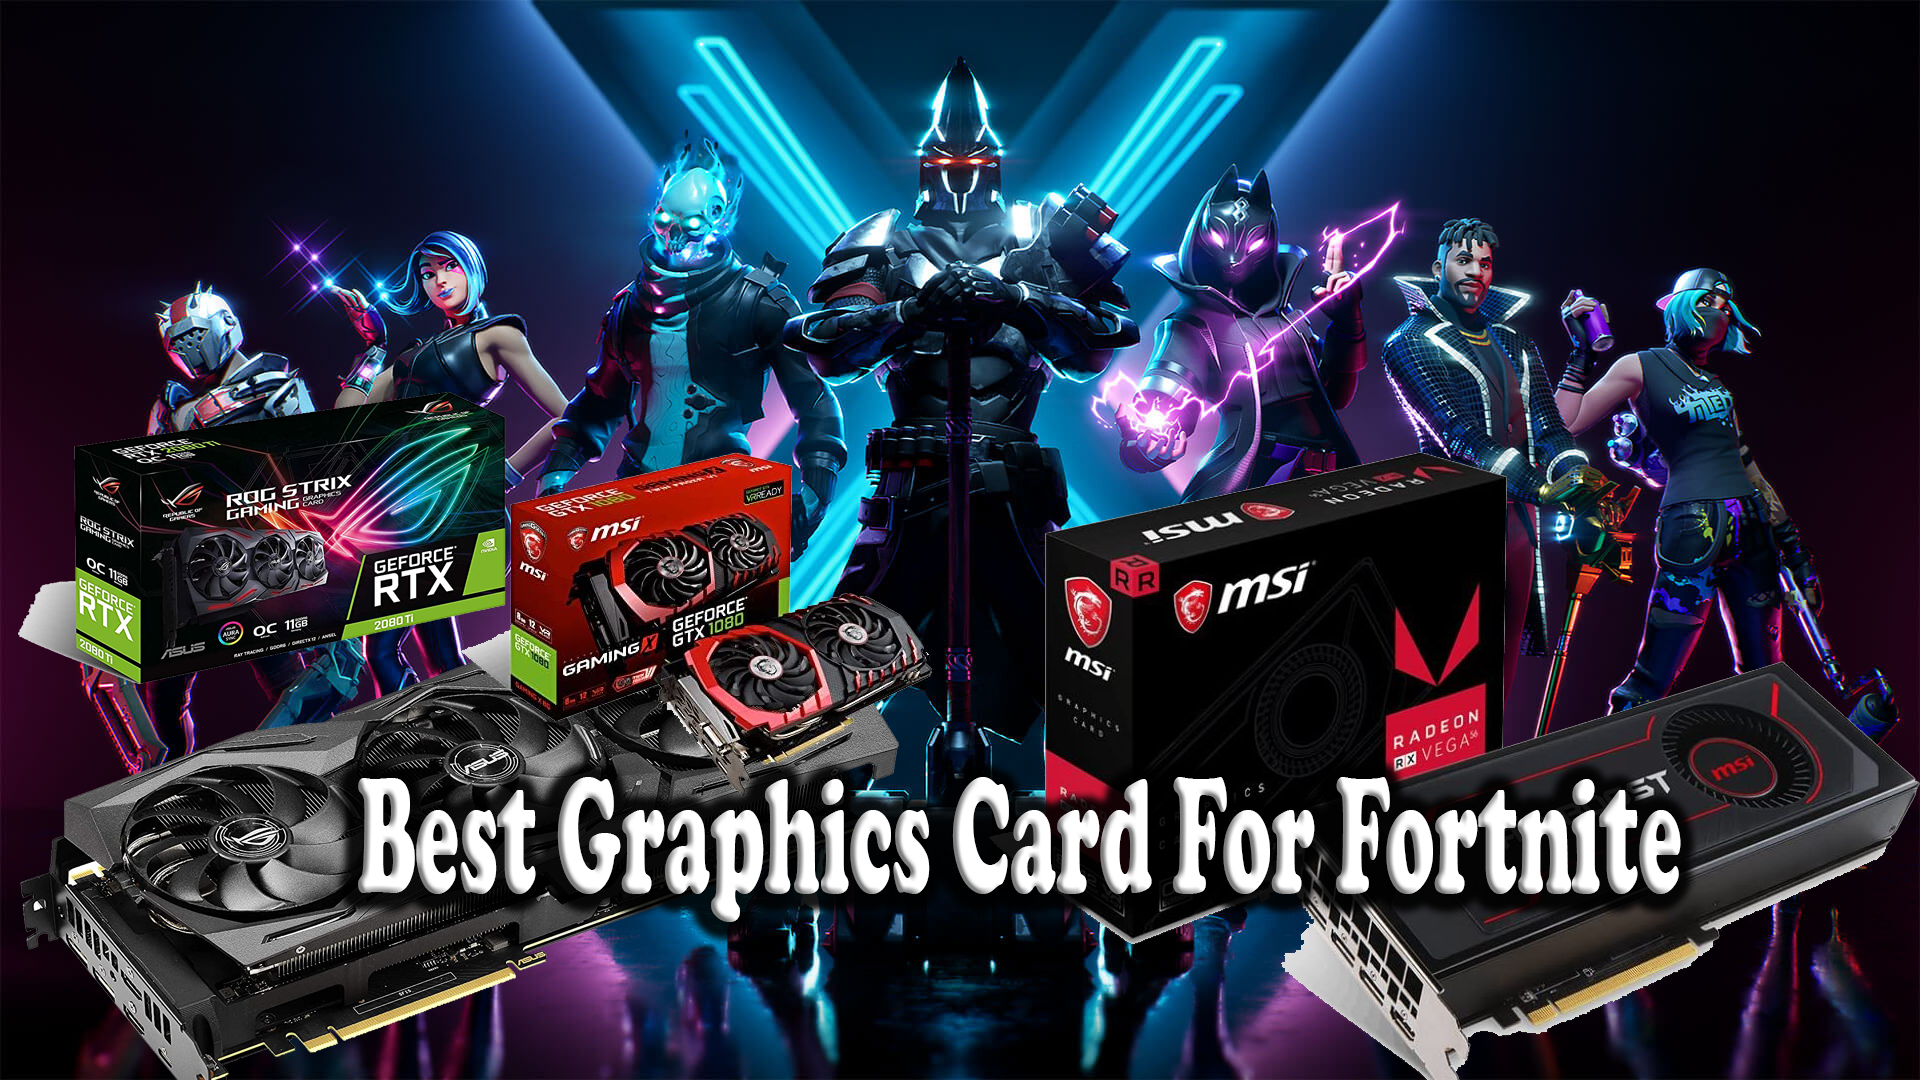 Best Graphics Card For Fortnite in 2021